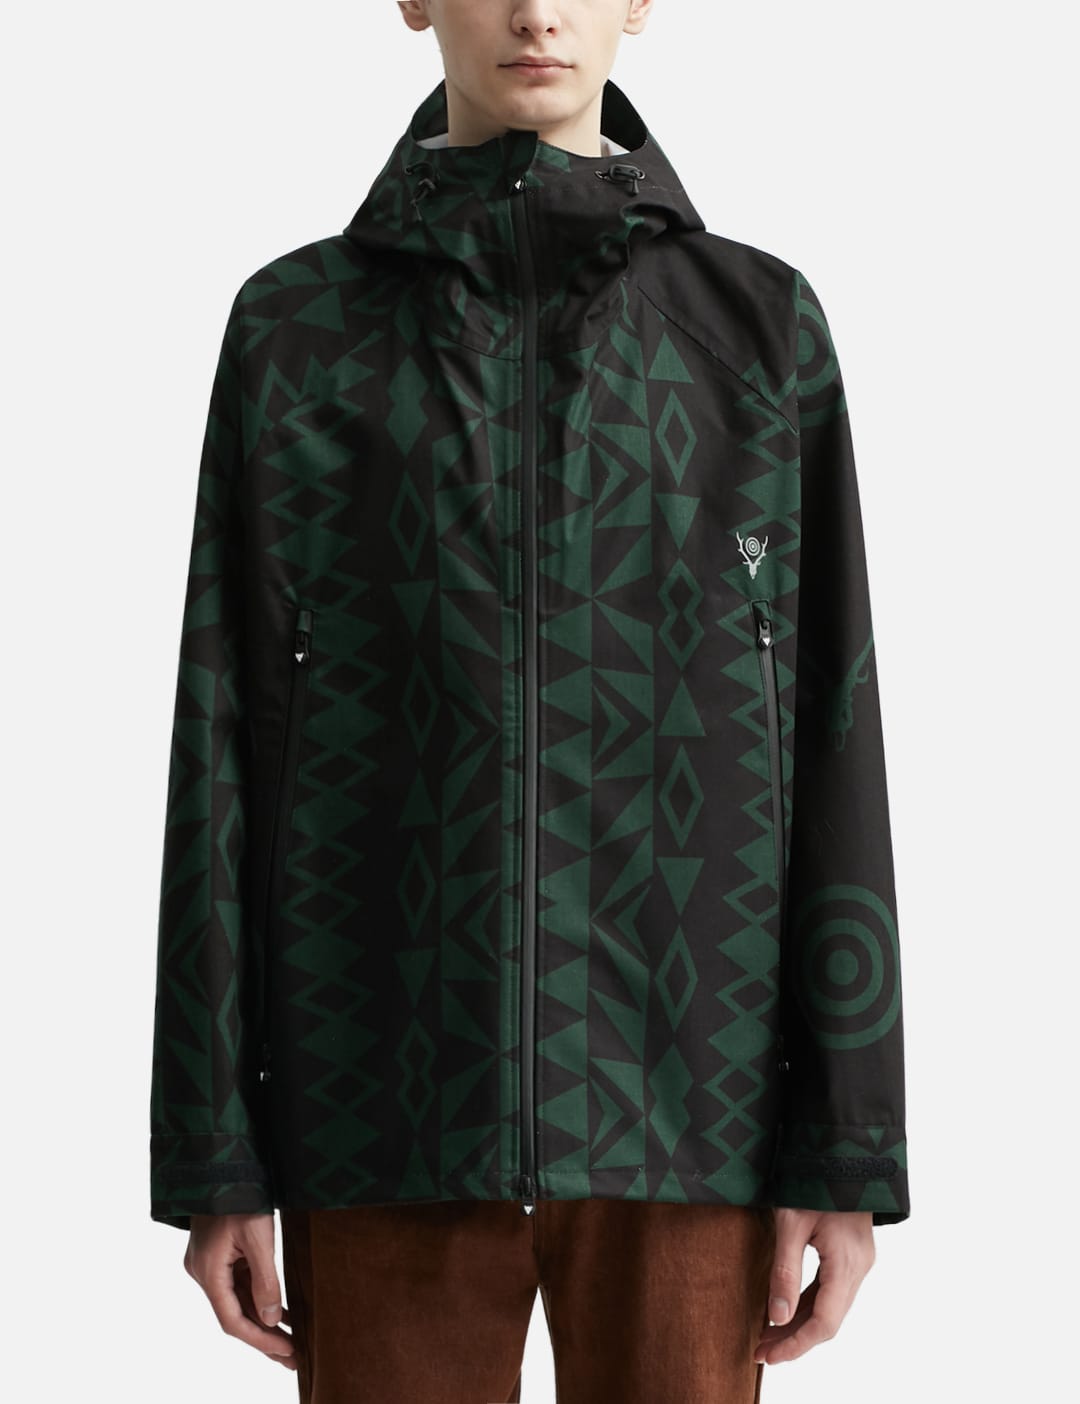 South2 West8 - WEATHER EFFECT JACKET | HBX - Globally Curated 